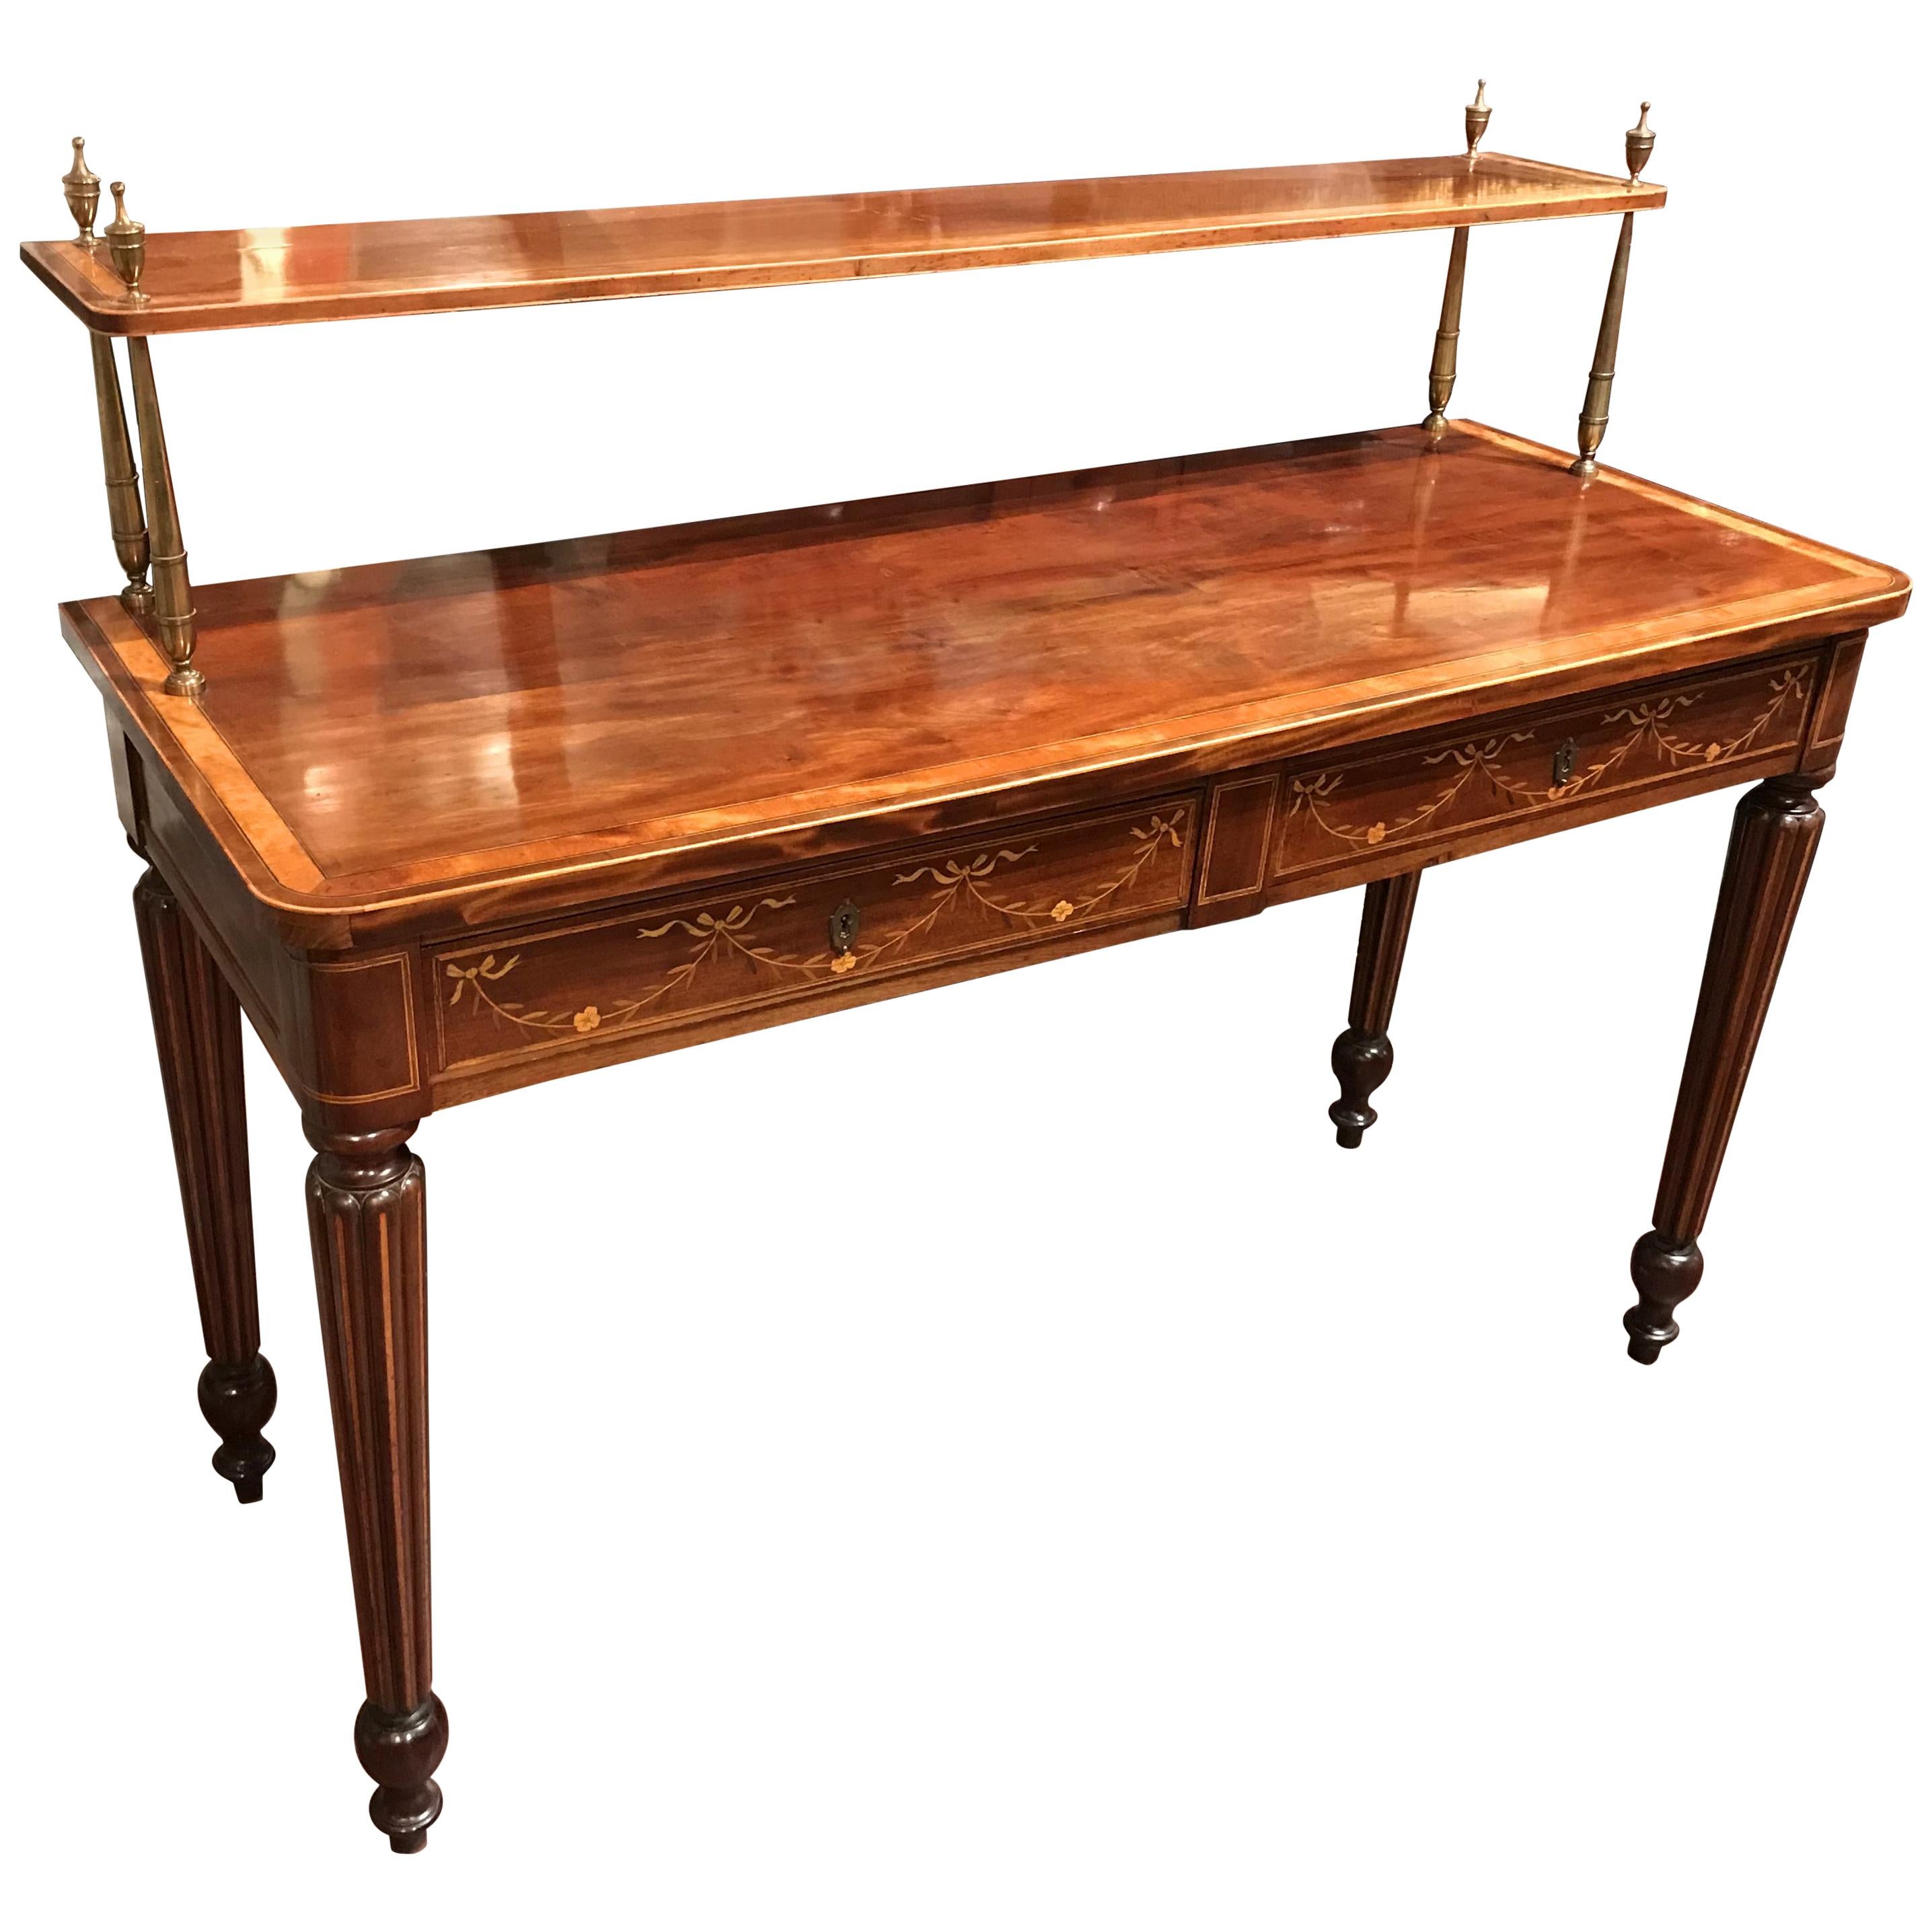 Early 19th Century English Regency Two-Tier Mahogany Server or Sideboard